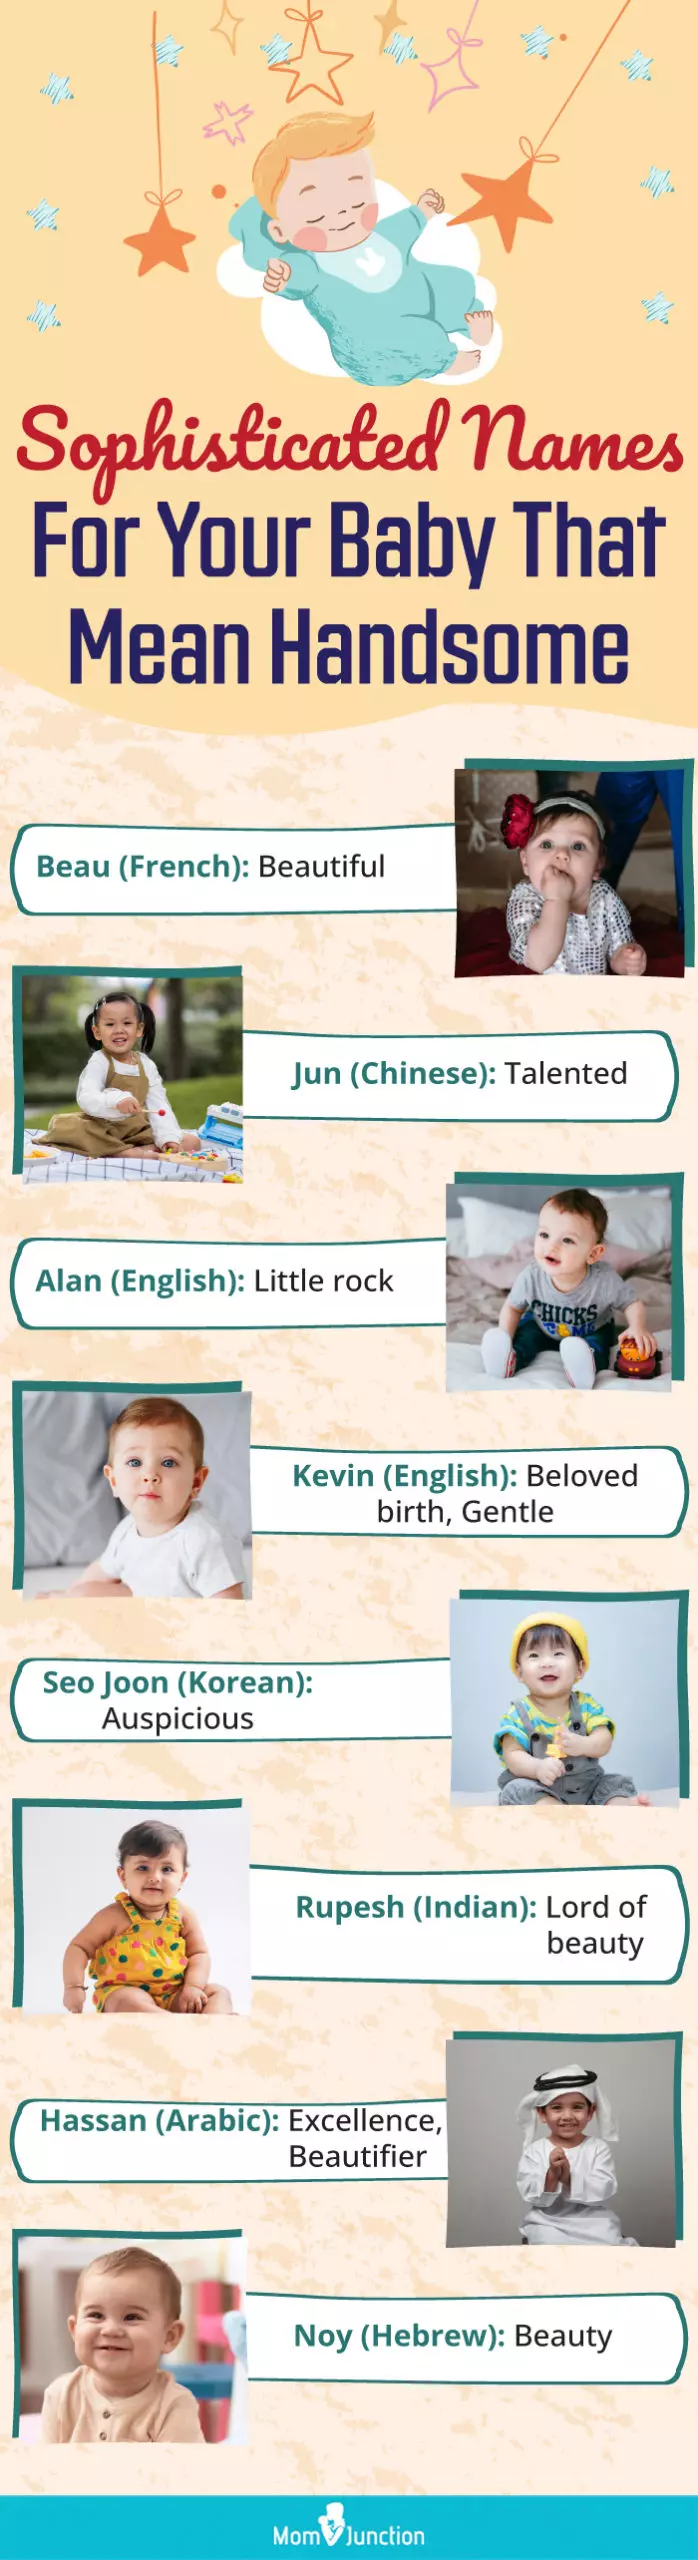 sophisticated names for your baby that mean handsome (infographic)